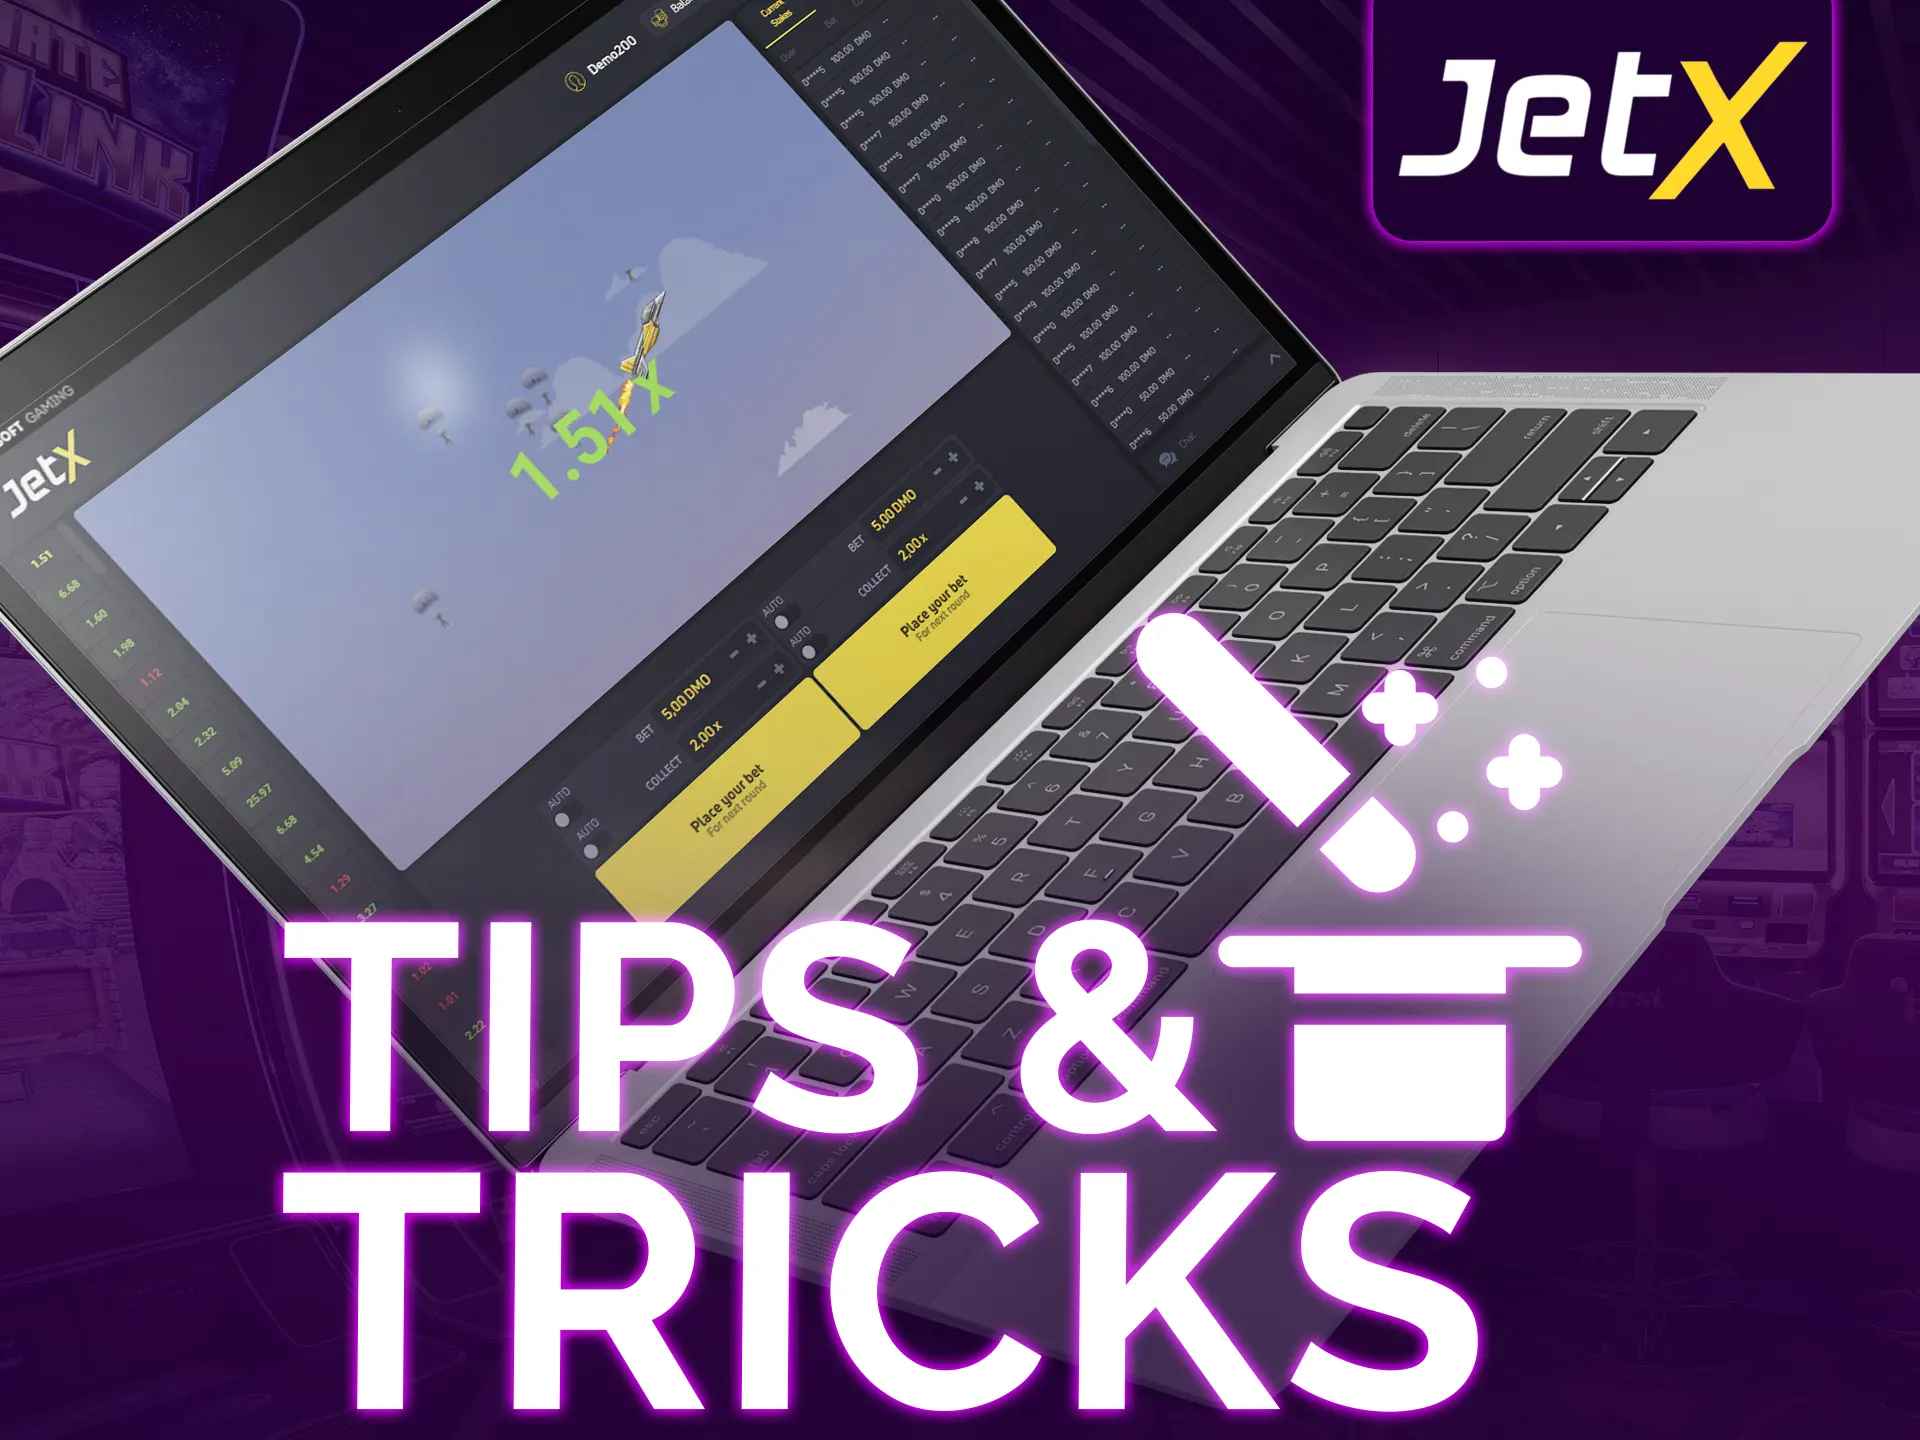 Use Jet X tips for better chances of winning.